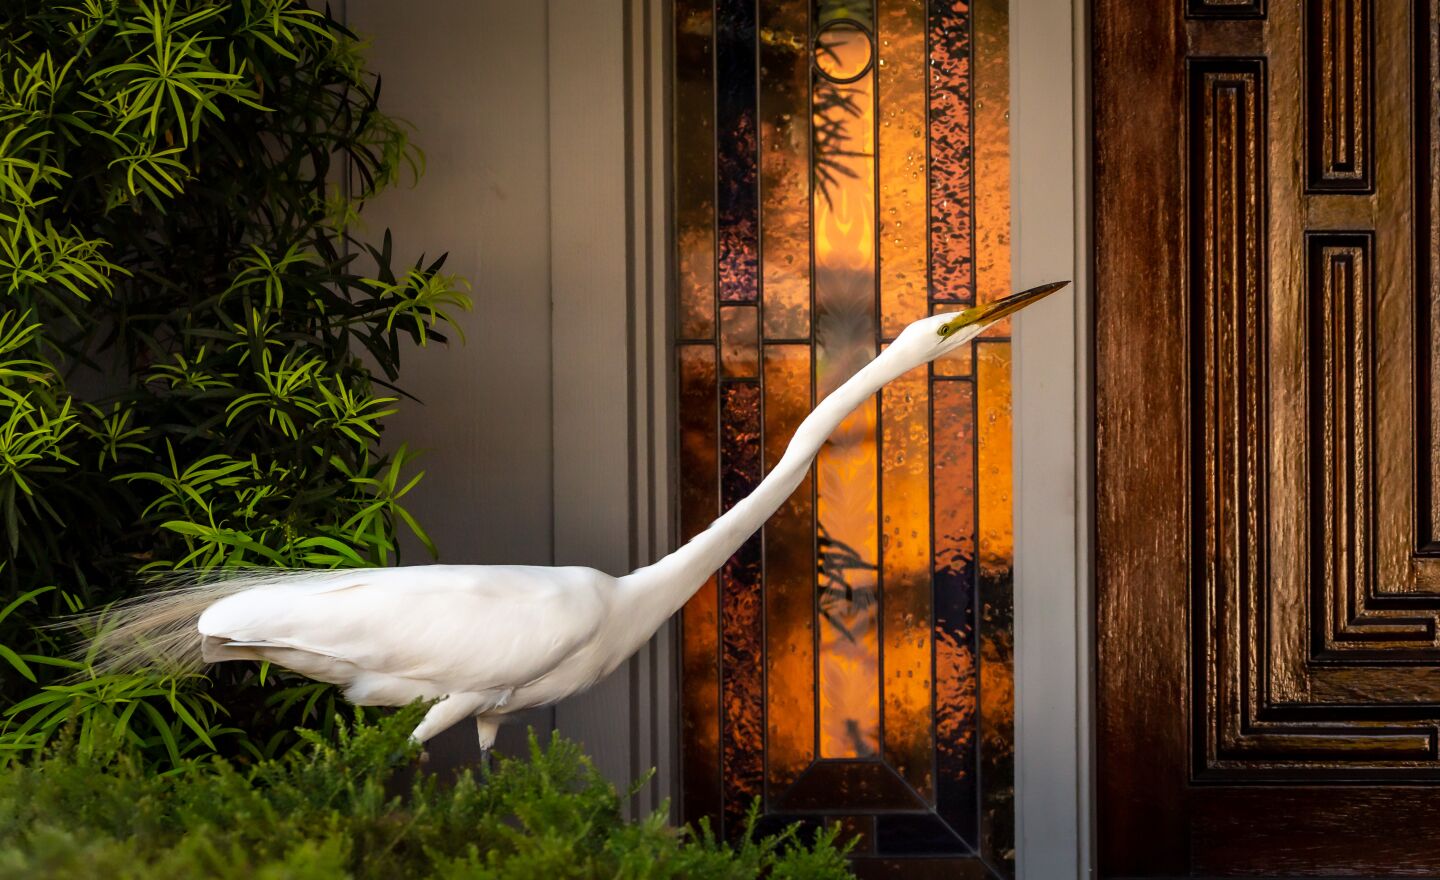 A great egret appears to be checking out our doorbell in Gatewood Hills.